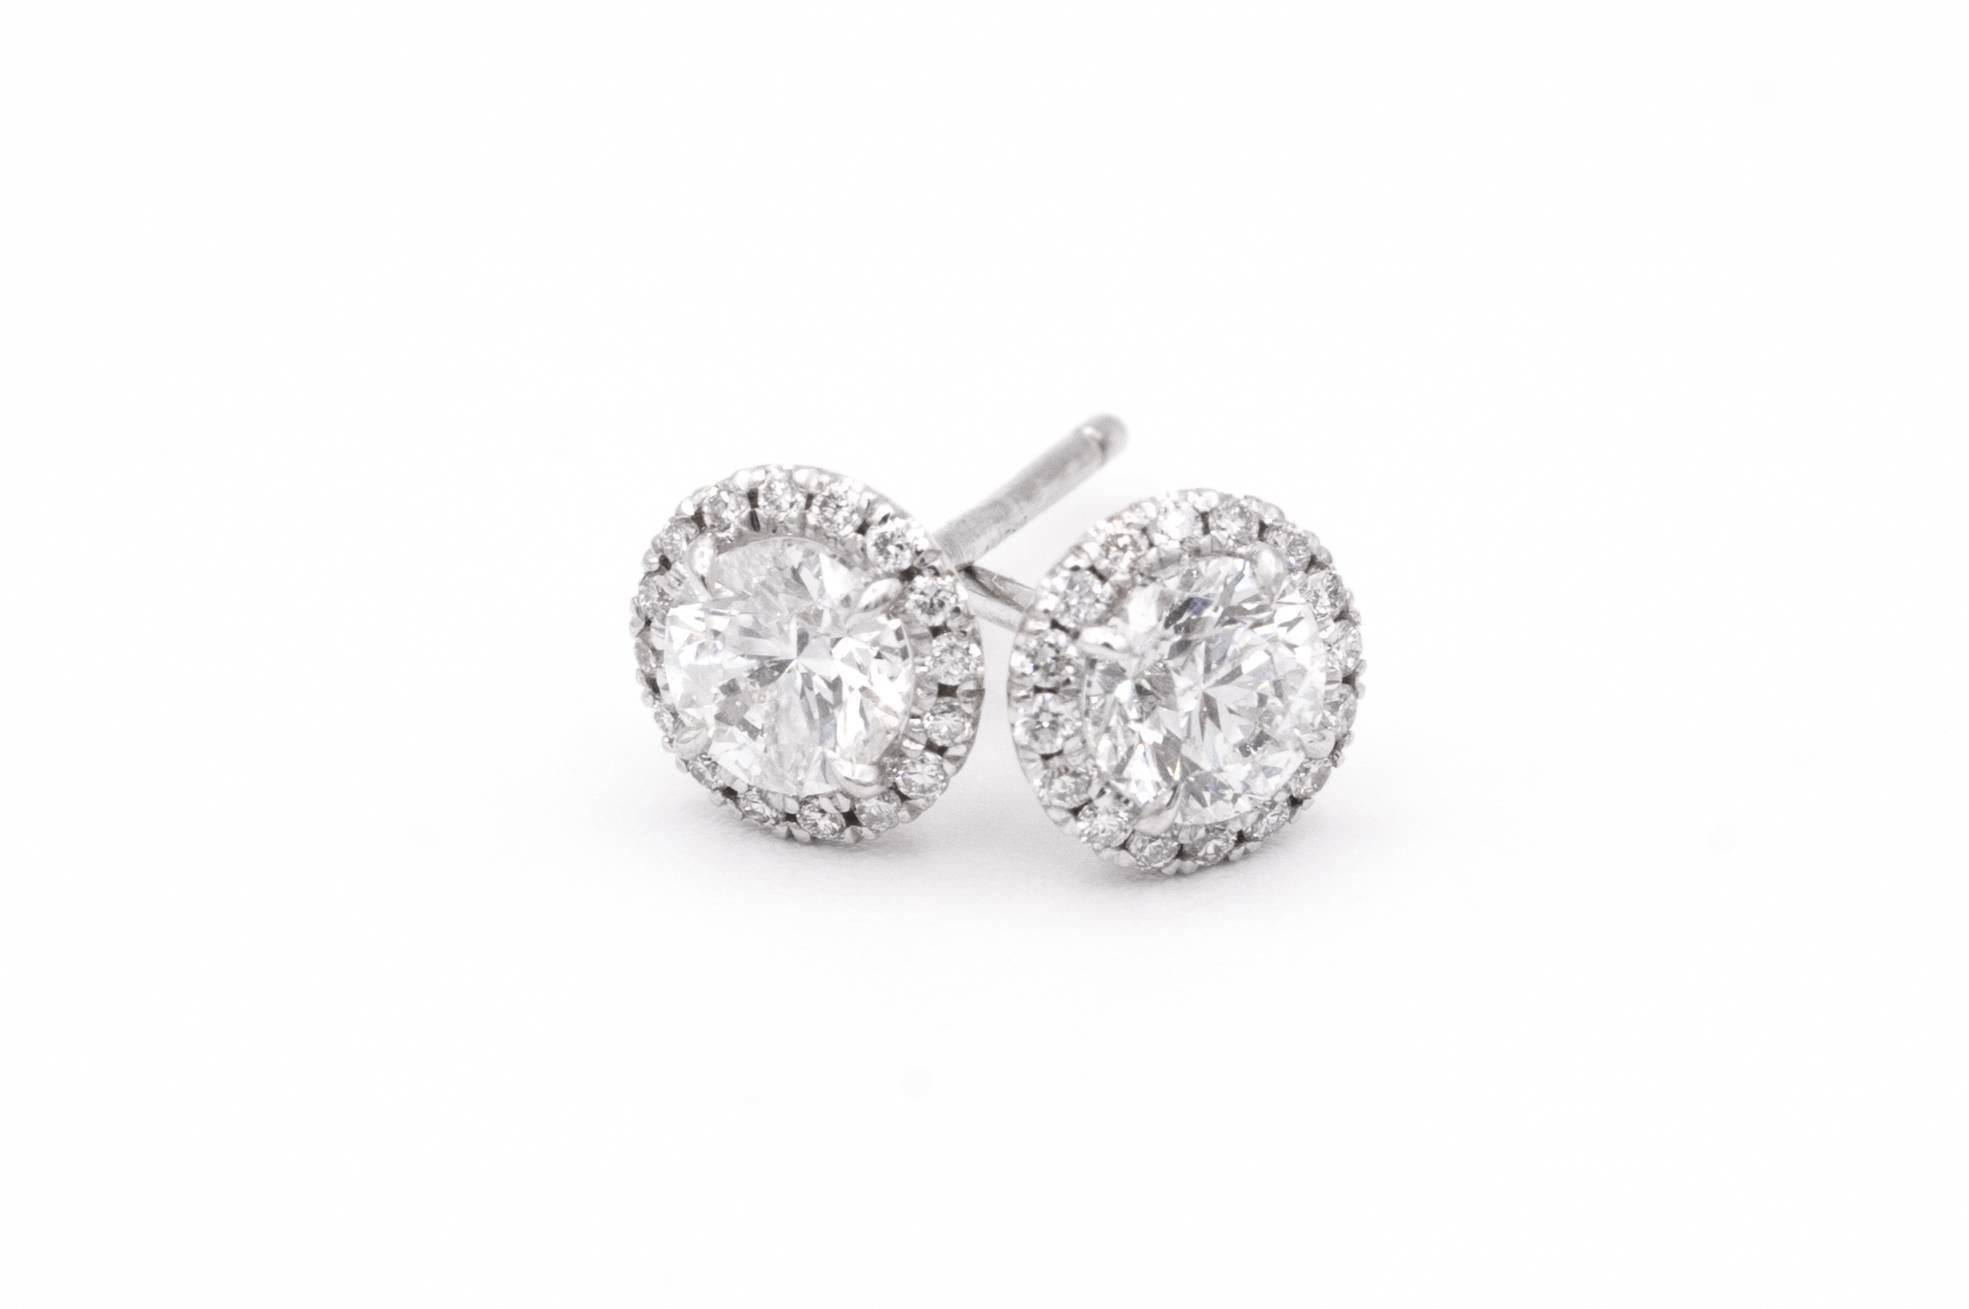 1.00 Carat Diamond Halo Stud earrings in 14K White Gold
Center Diamonds are .92 carats total , G color, SI3 clarity
Surrounded by 32 diamonds weighing an additional .15 cts. 
Total diamonds weight is 1.09 cts 
Has the look of 1 carat each diamonds